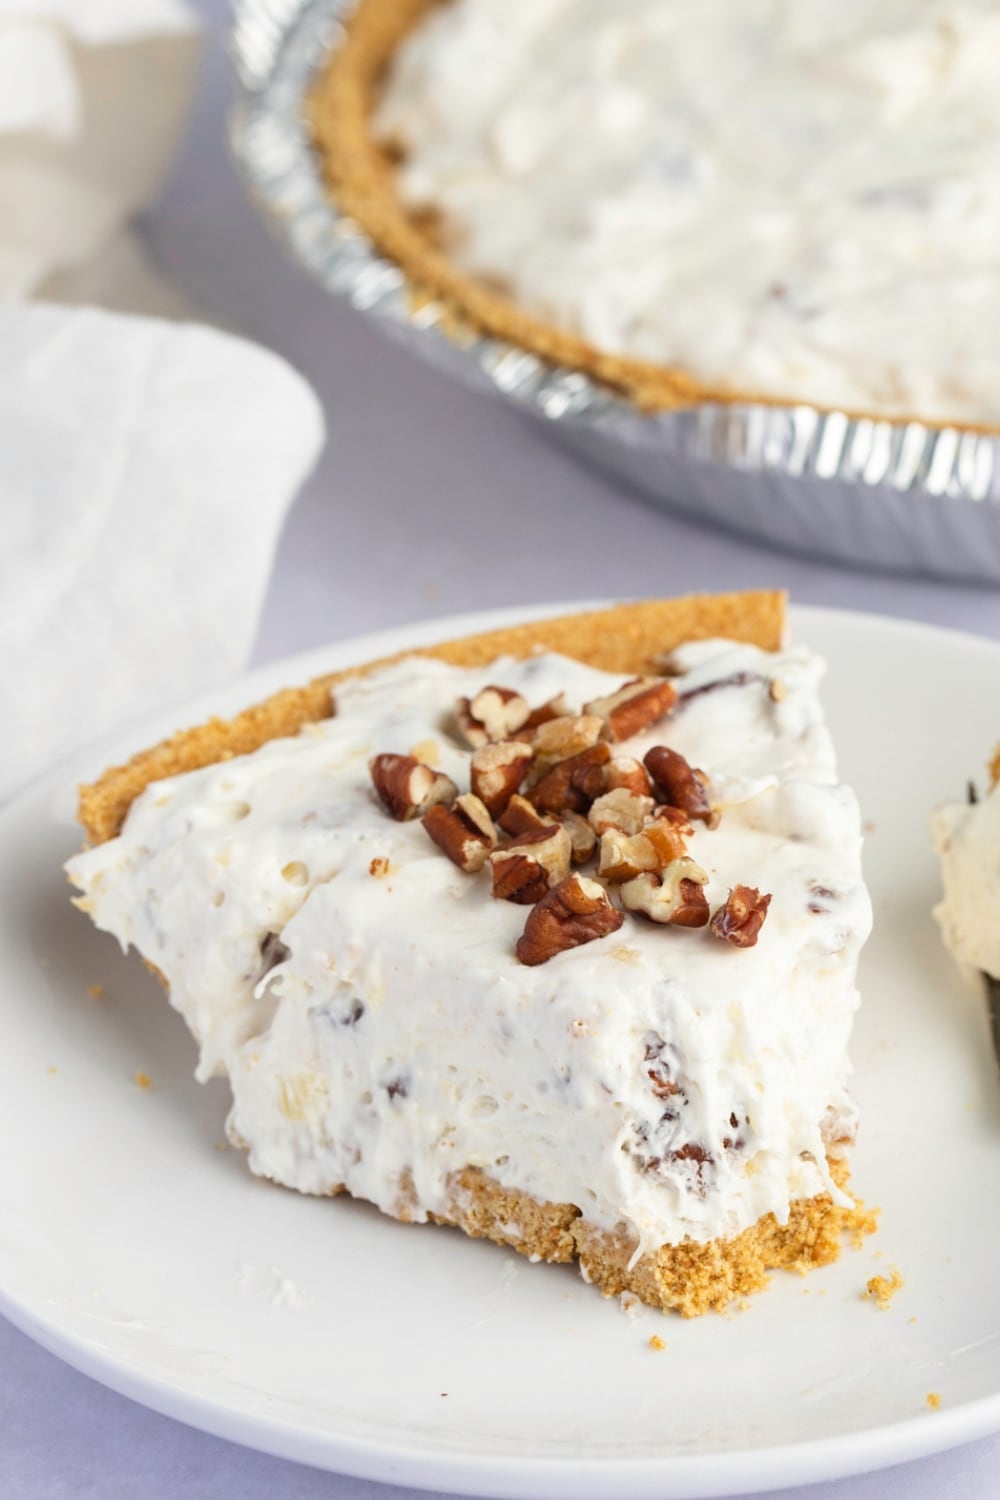 Millionaire pie slice topped with chopped pecans served on a white plate.